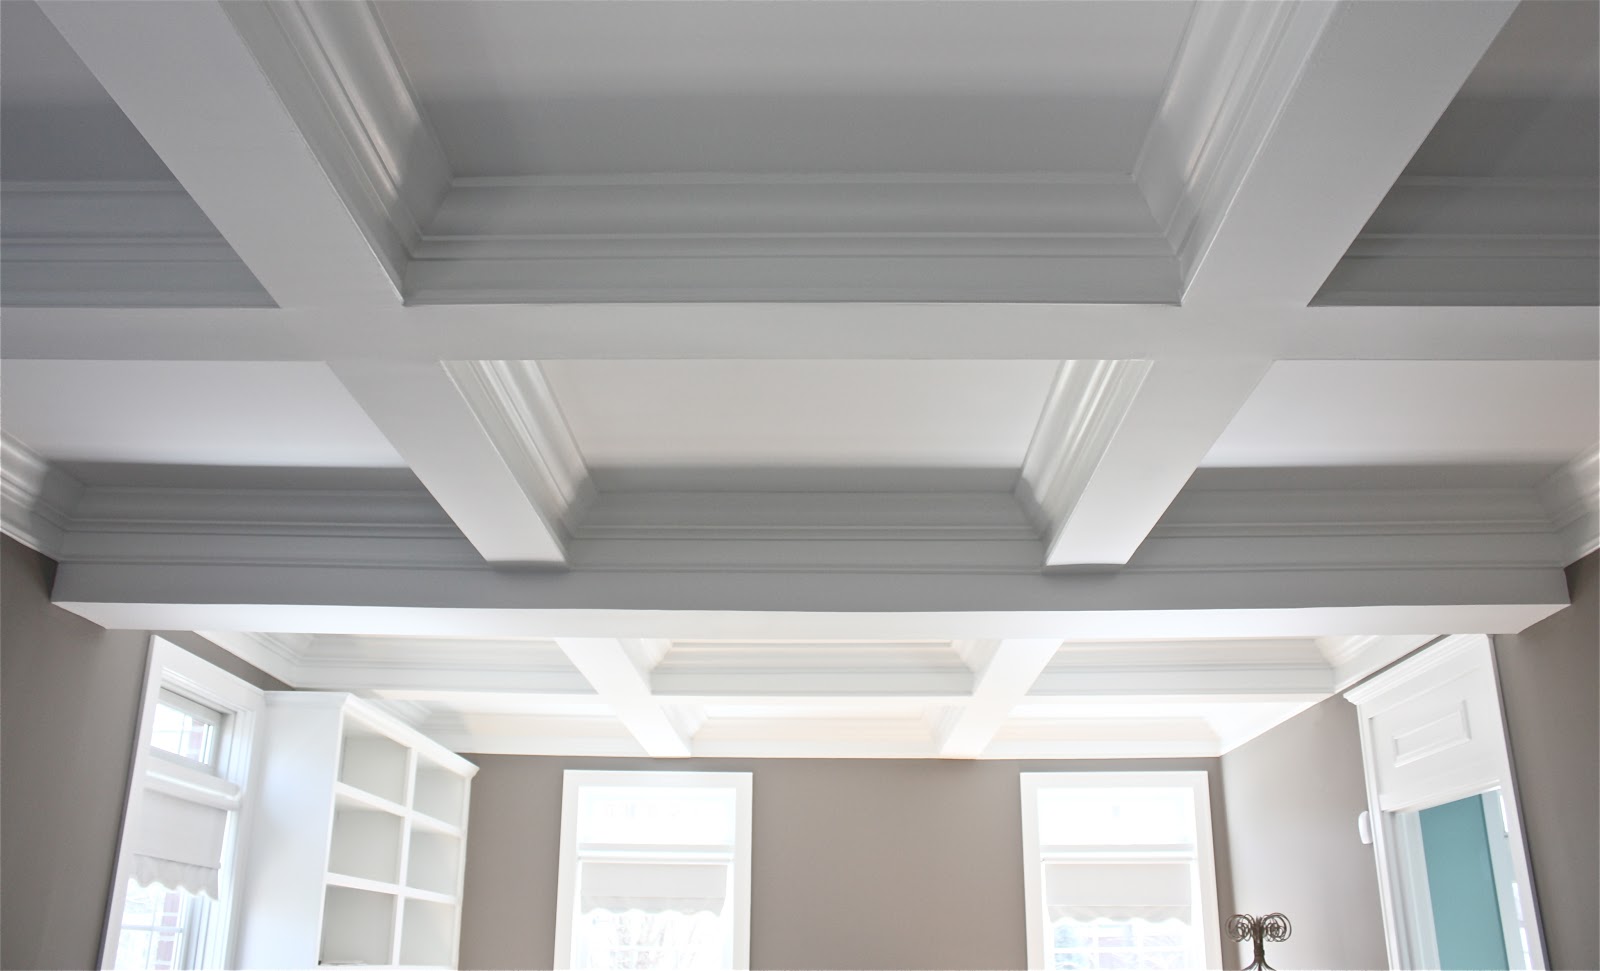 What Is The Cost To Install A Ceiling, How Much Does It Cost To Install A Coffered Ceiling